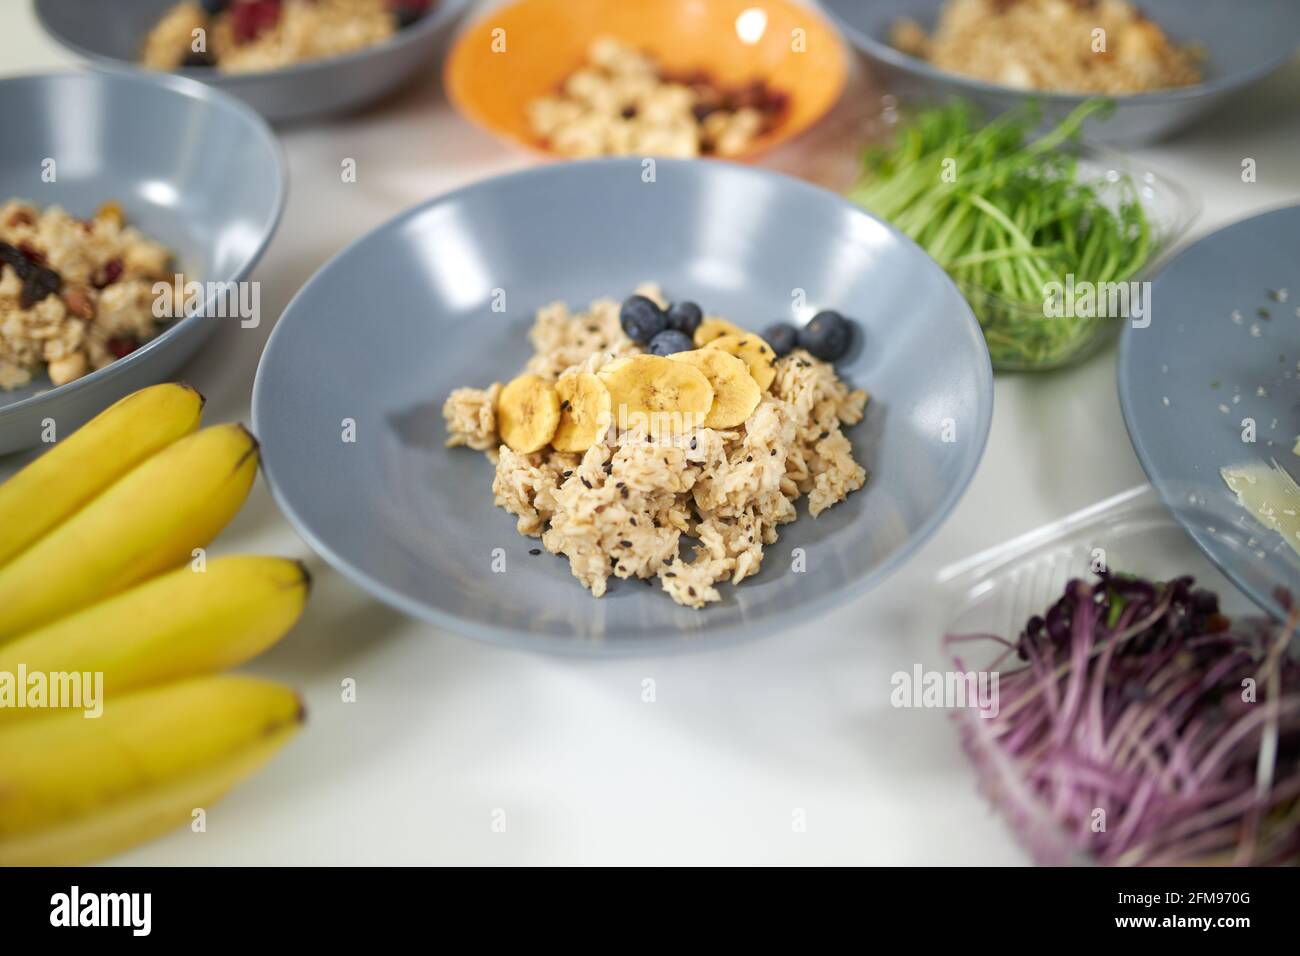 Close up of tasty and healthy porridge with fresh fruits in beautiful blue plate. Concept of process cooking delicious dish at home with tasty ingredients and fresh vegetables and fruits. Stock Photo